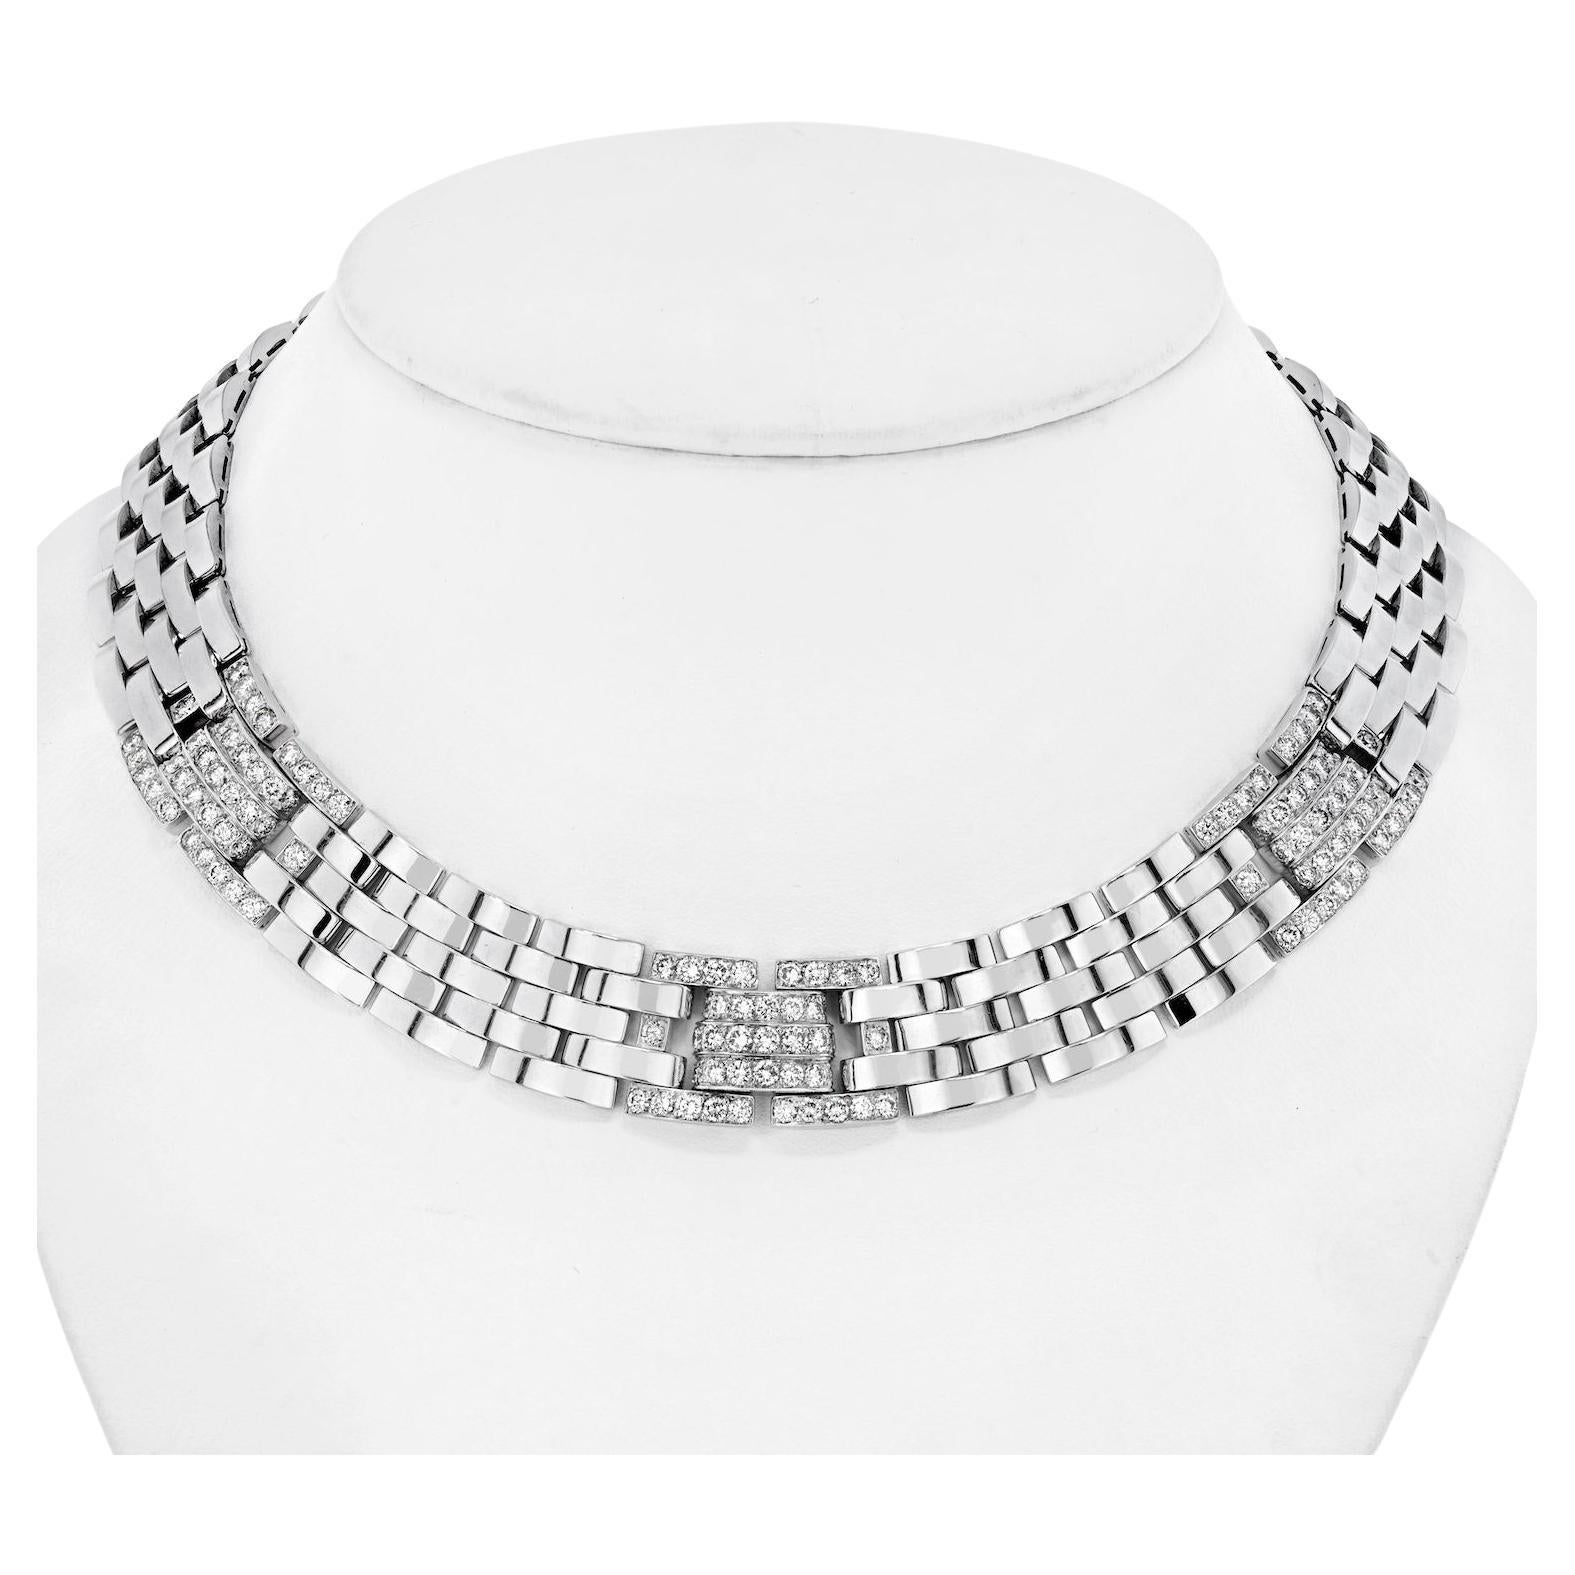 Cartier 18K White Gold and Diamond ‘Maillon Panthère’ Necklace